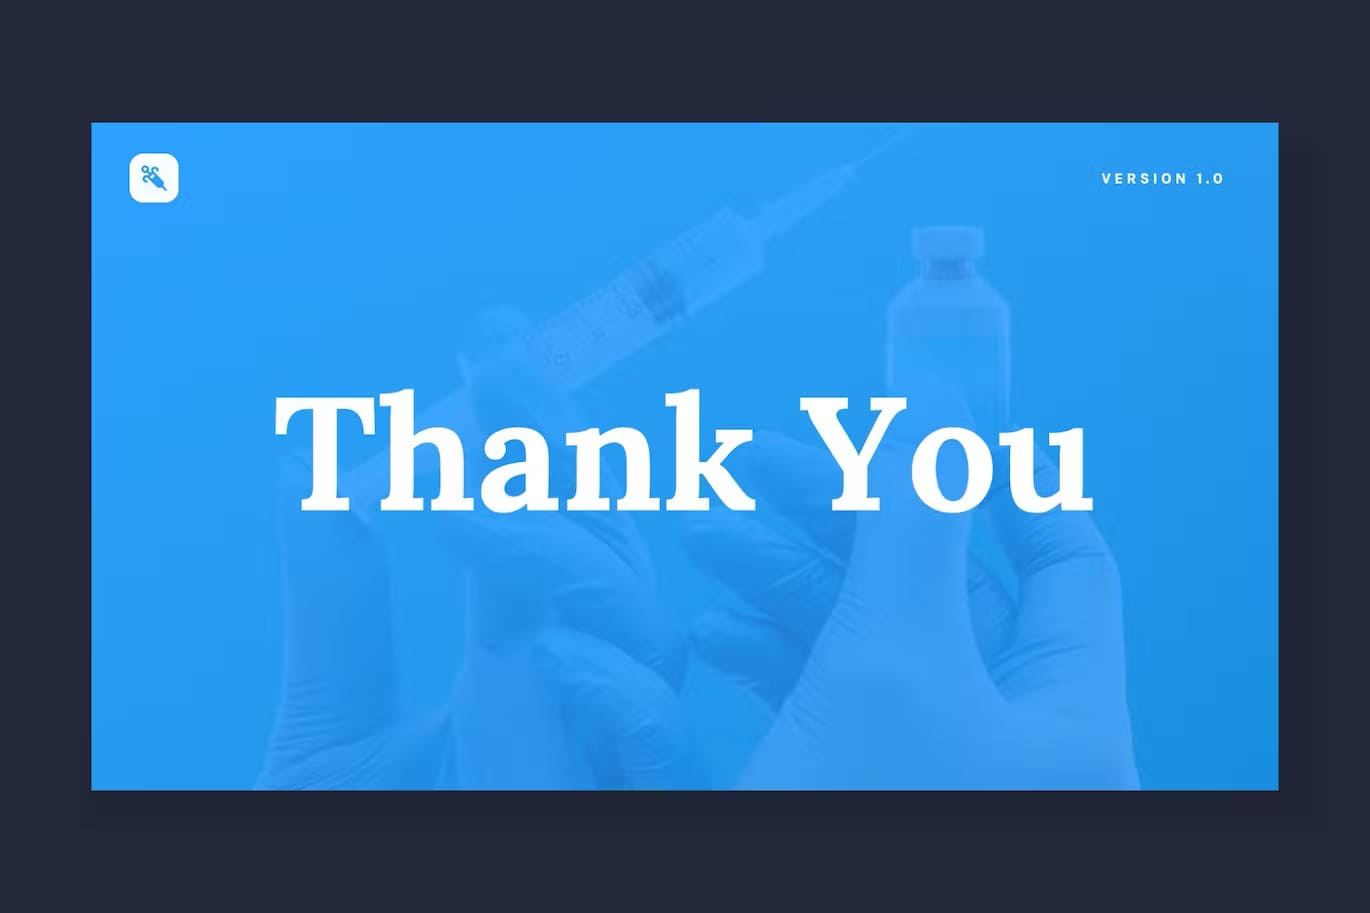 Inscription "Thank you" on the Vacino - Vaccine Powerpoint Template.